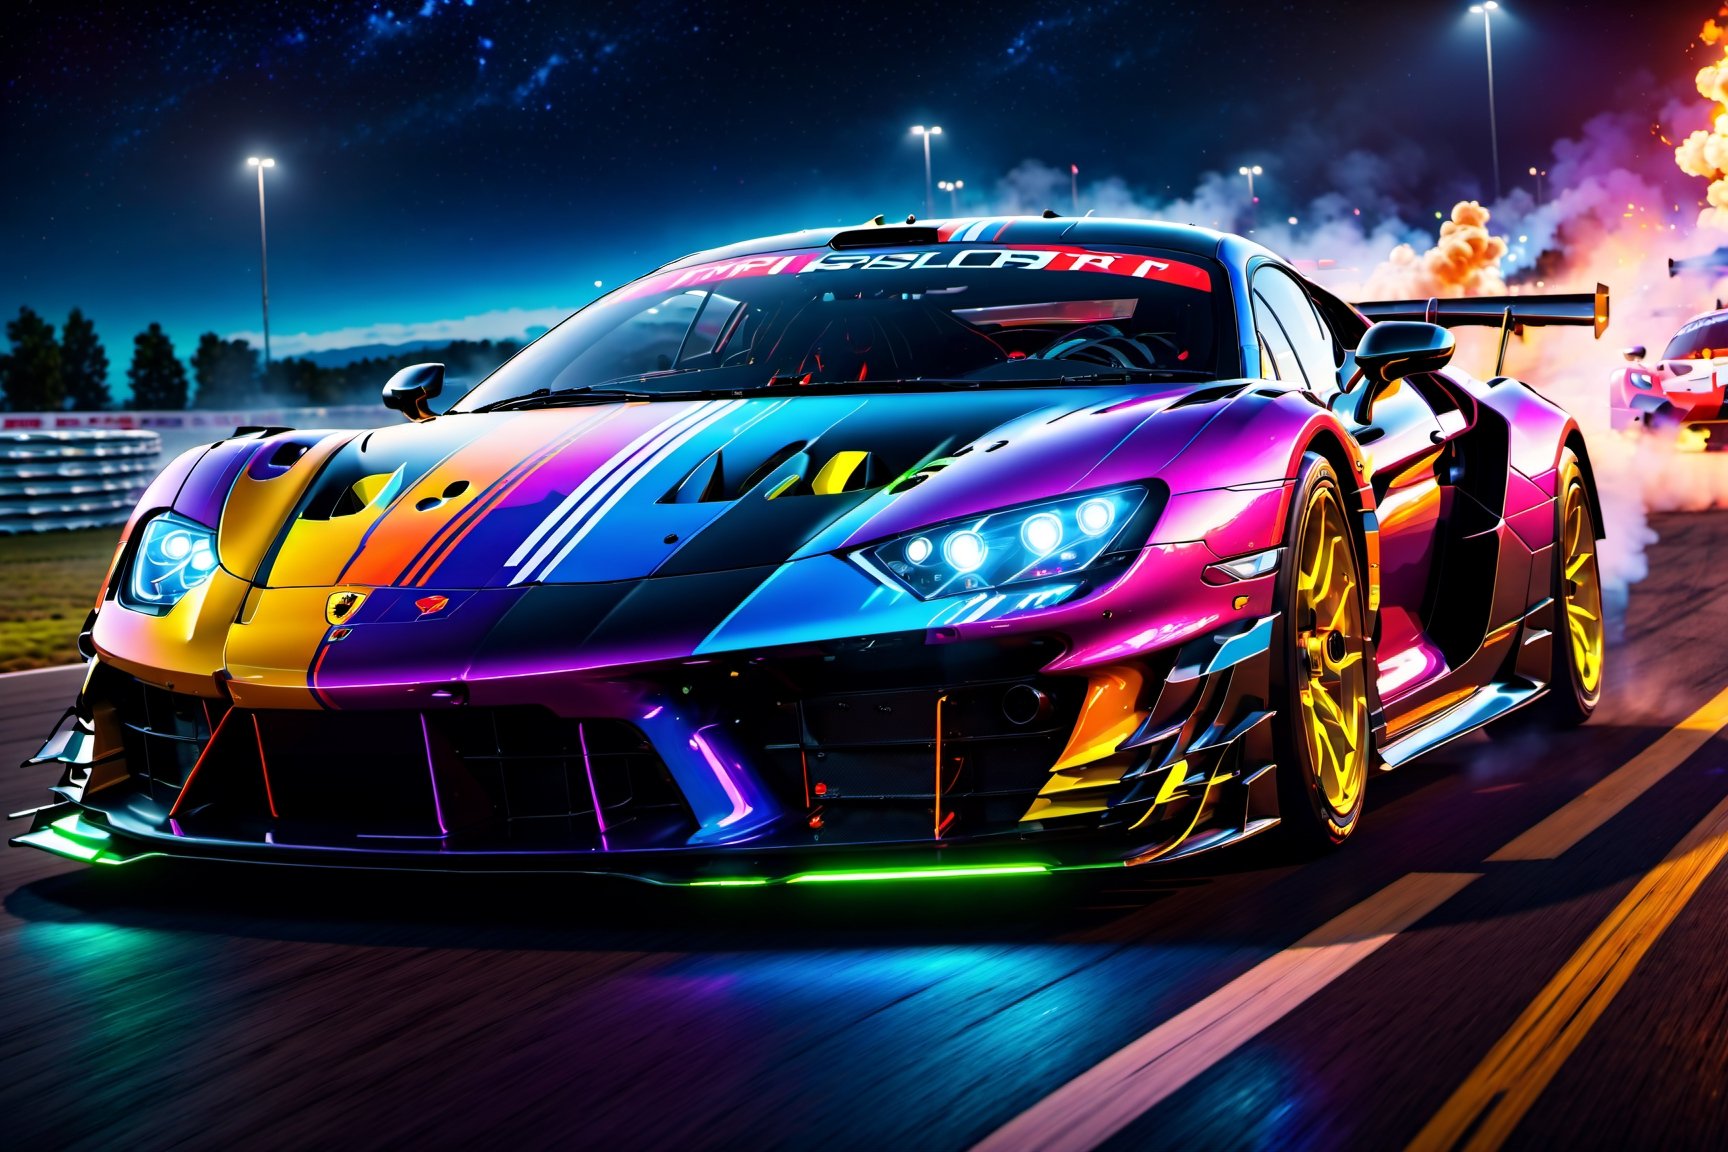  (masterpiece, best quality, ultra-detailed, 8K), race car, street racing-inspired,Drifting inspired, LED, ((Twin headlights)), (((Bright neon color racing stripes))), (Black racing wheels), Wheelspin showing motion, Show car in motion, Burnout,  wide body kit, modified car,  racing livery, masterpiece, best quality, realistic, ultra highres, (((depth of field))), (full dual colour neon lights:1.2), (hard dual color lighting:1.4), (detailed background), (masterpiece:1.2), (ultra detailed), (best quality), intricate, comprehensive cinematic, magical photography, (gradients), glossy, Night with galaxy sky, Fast action style, fire out of tail pipes, Sideways drifting in to a turn, Neon galaxy metalic paint with race stripes, GTR Nismo, NSX, Porsche, Lamborghini, Ferrari, Bugatti, Ariel Atom, BMW, Audi, Mazda, Toyota supra, Lamborghini Aventador,  aesthetic,intricate, realistic,cinematic lighting, Neon Paint, streaks of fire,c_car,more detail XL,mecha